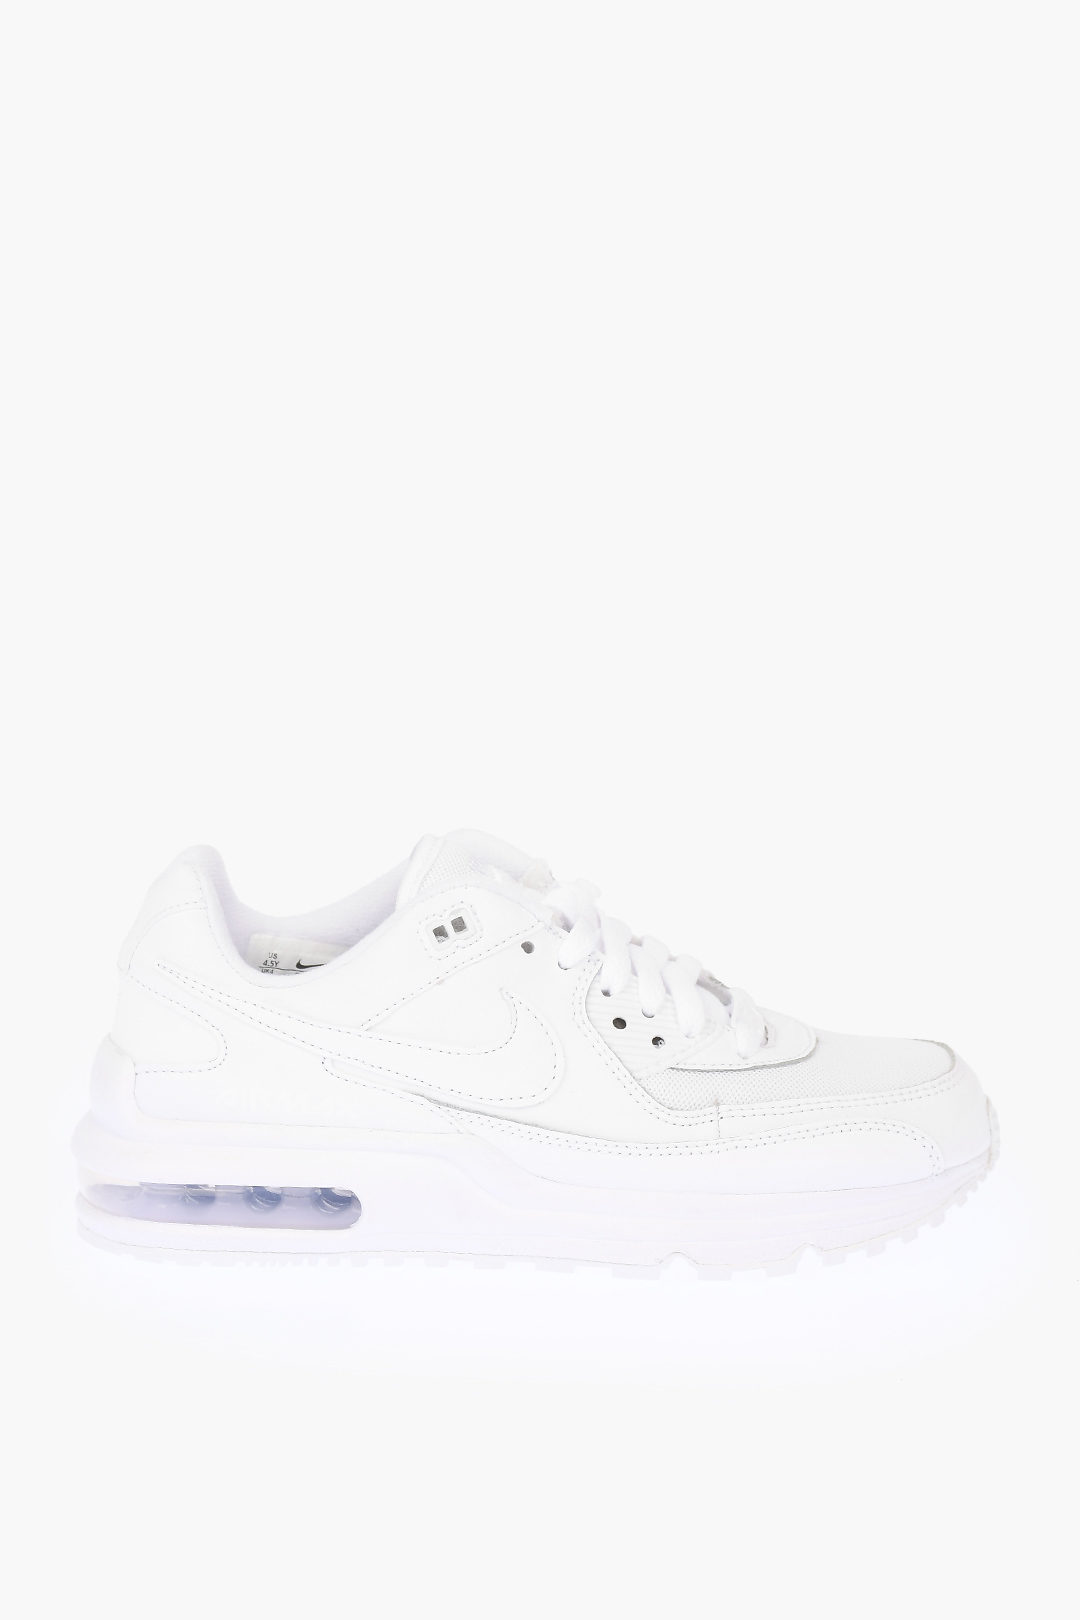 Flytte Vestlig Immunitet Nike Fabric and Leather AIR MAX WRIGHT Sneakers women - Glamood Outlet